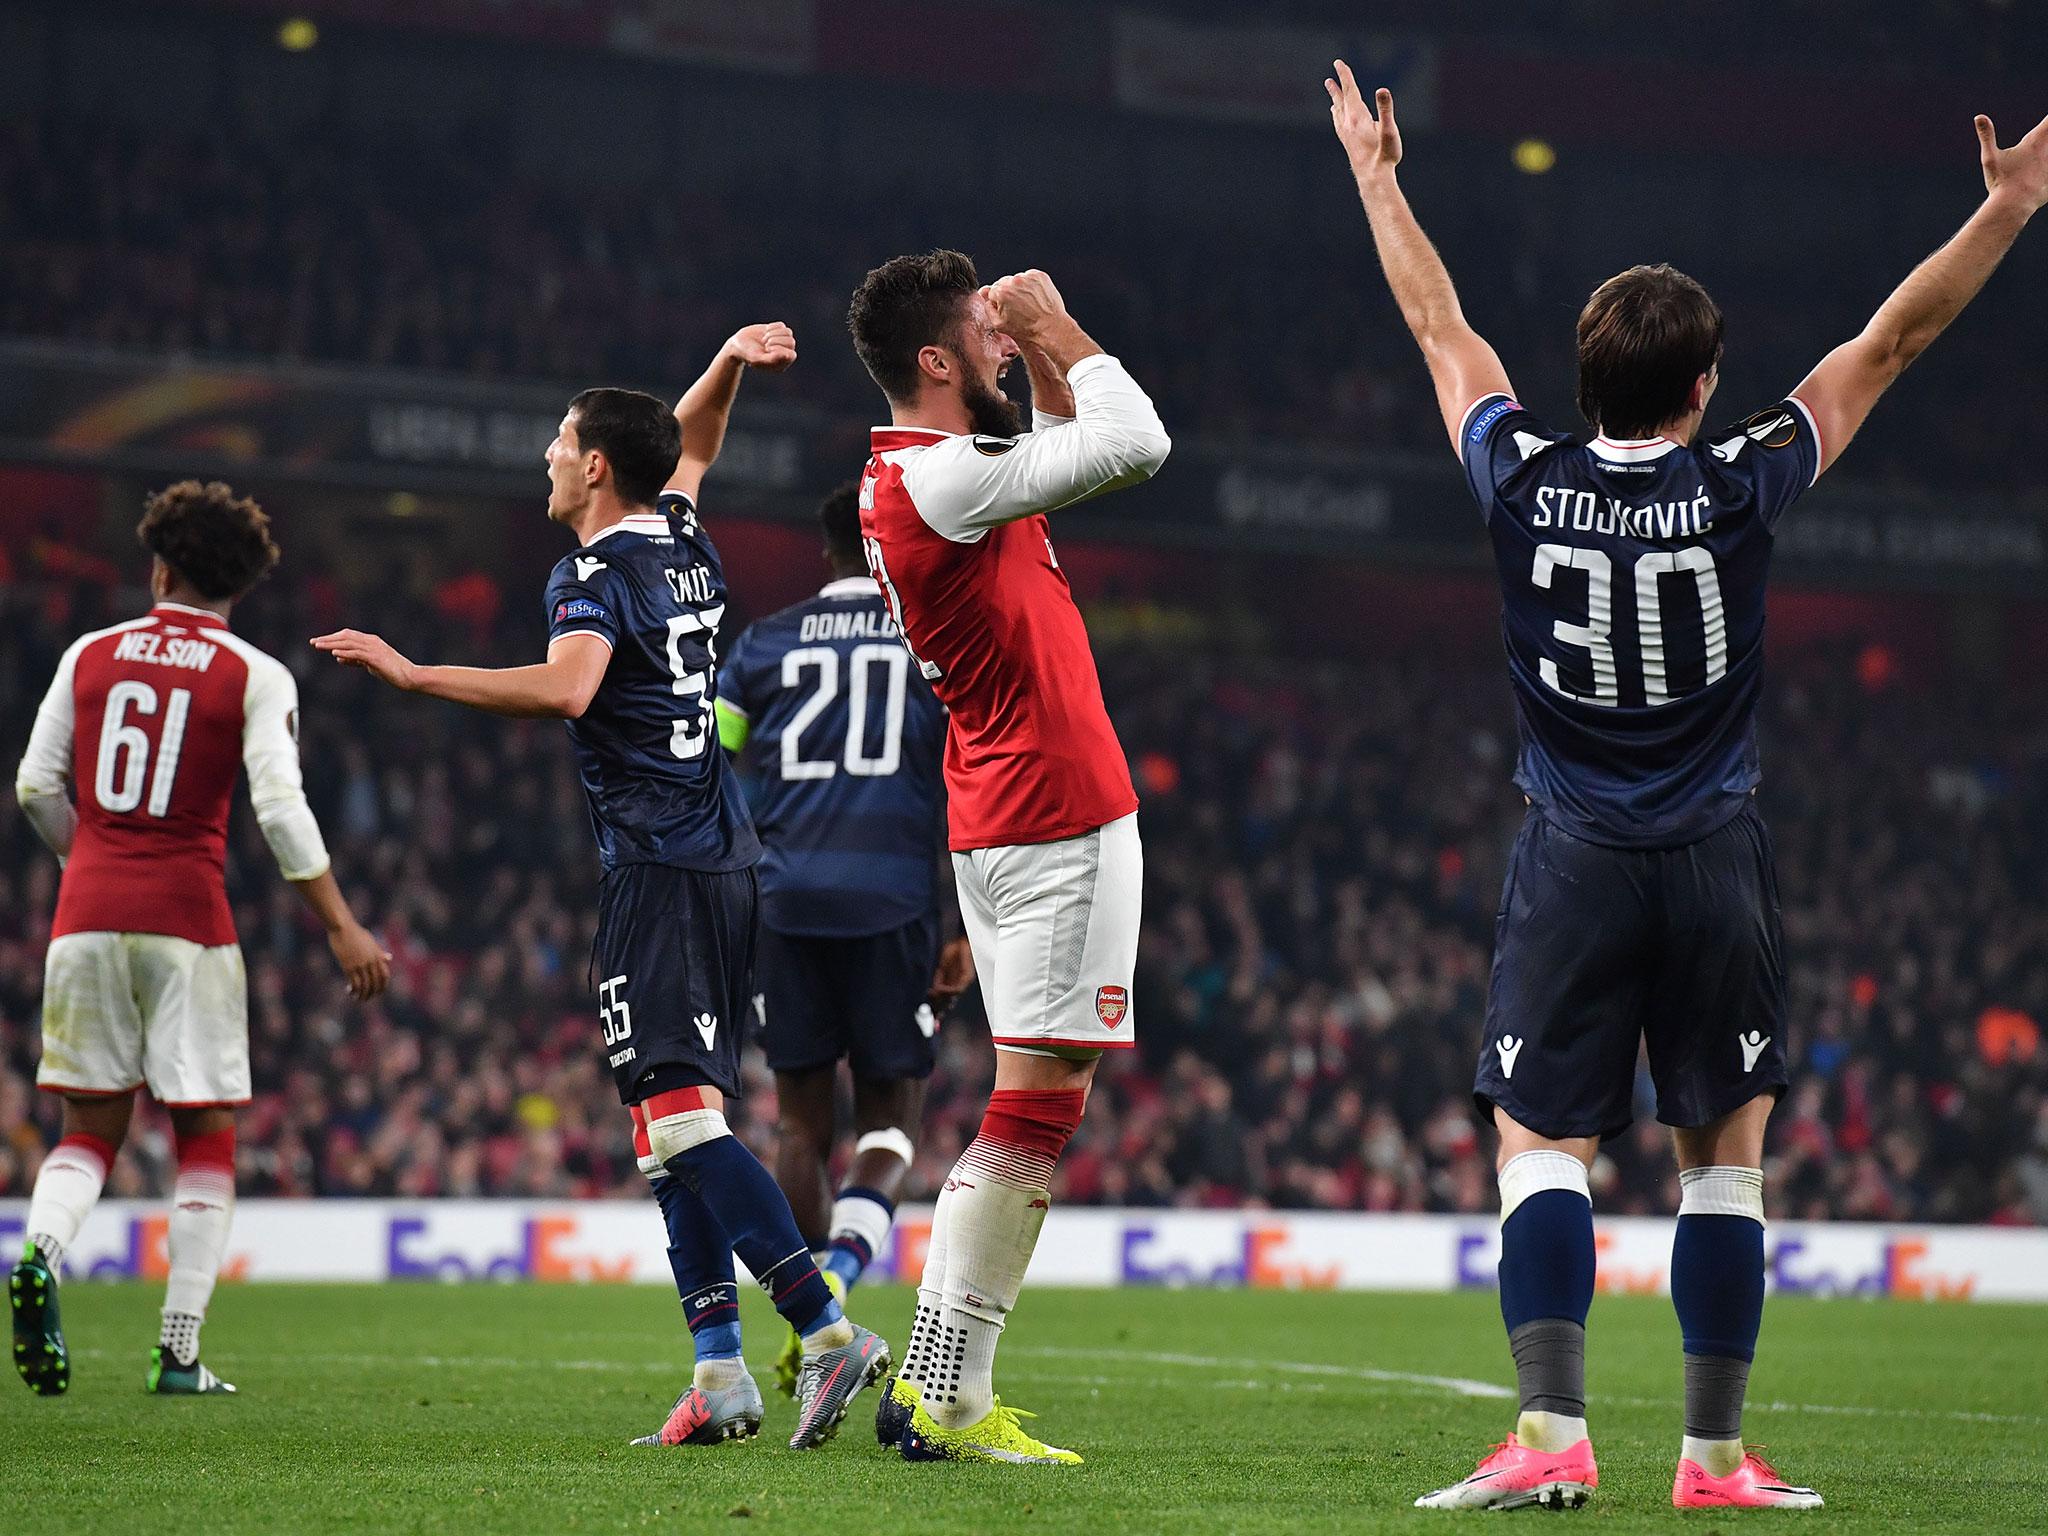 Giroud reacts after squandering a chance in front of goal (Getty)